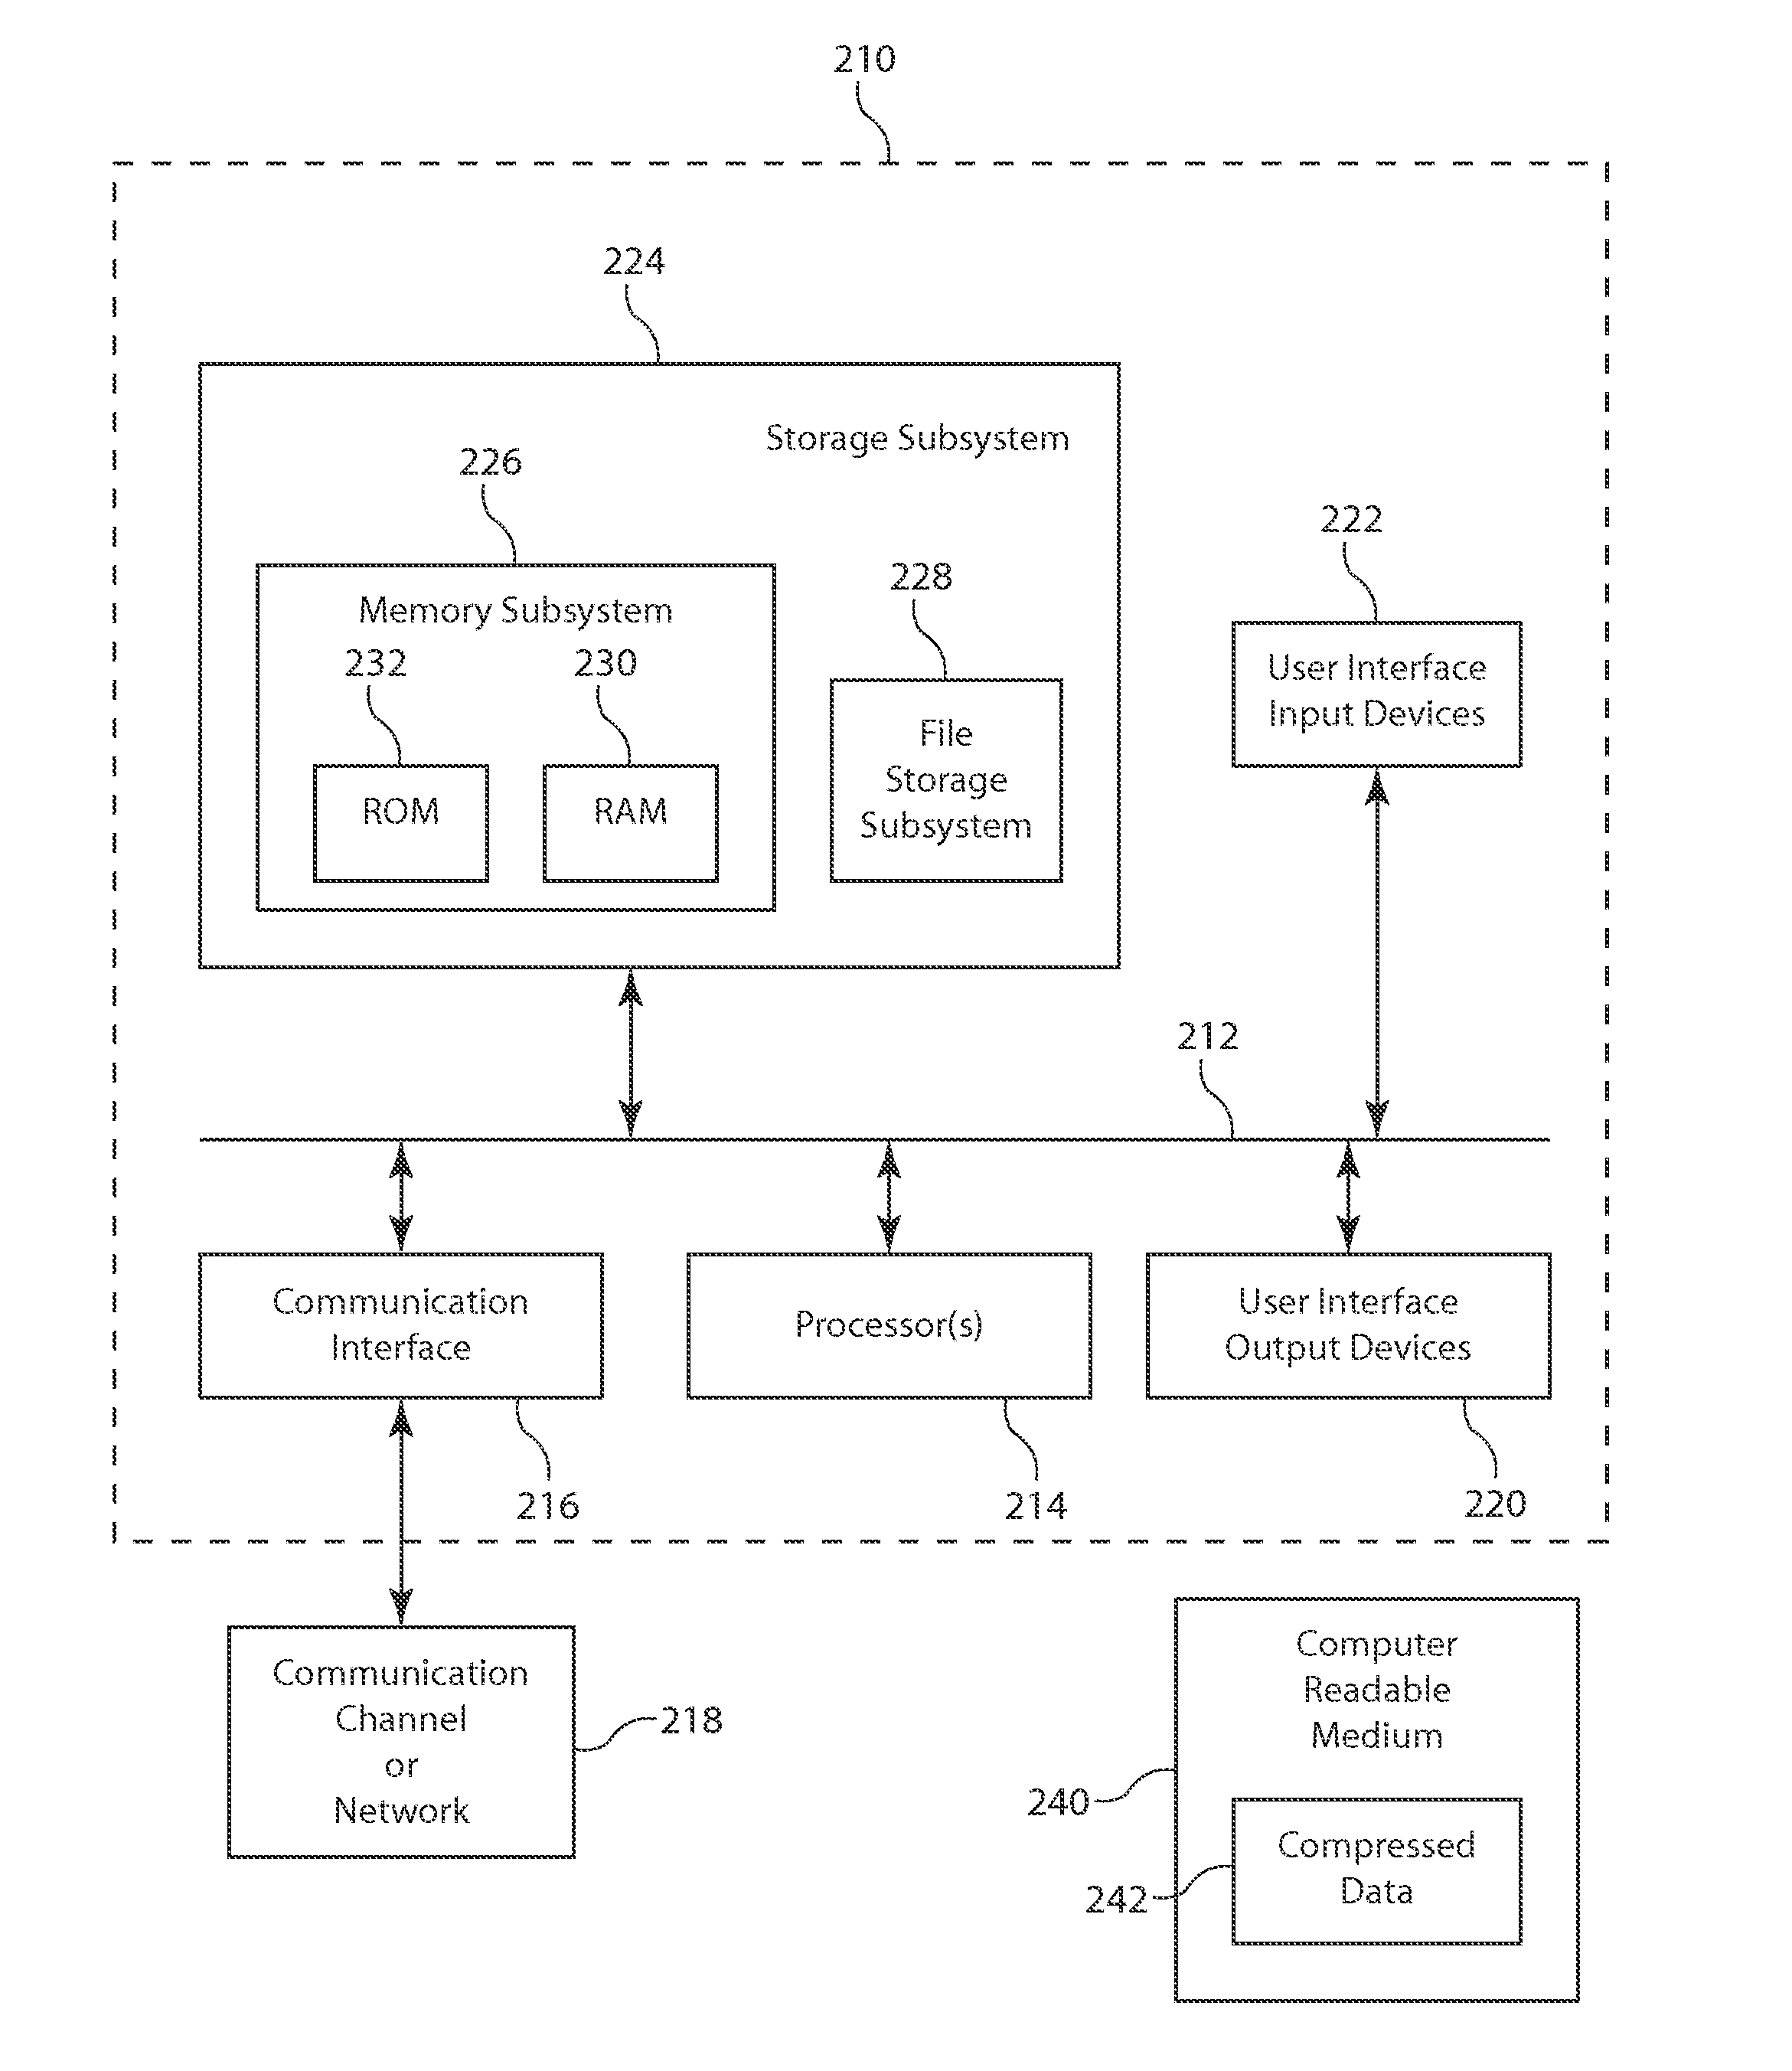 Data compression for direct memory access transfers